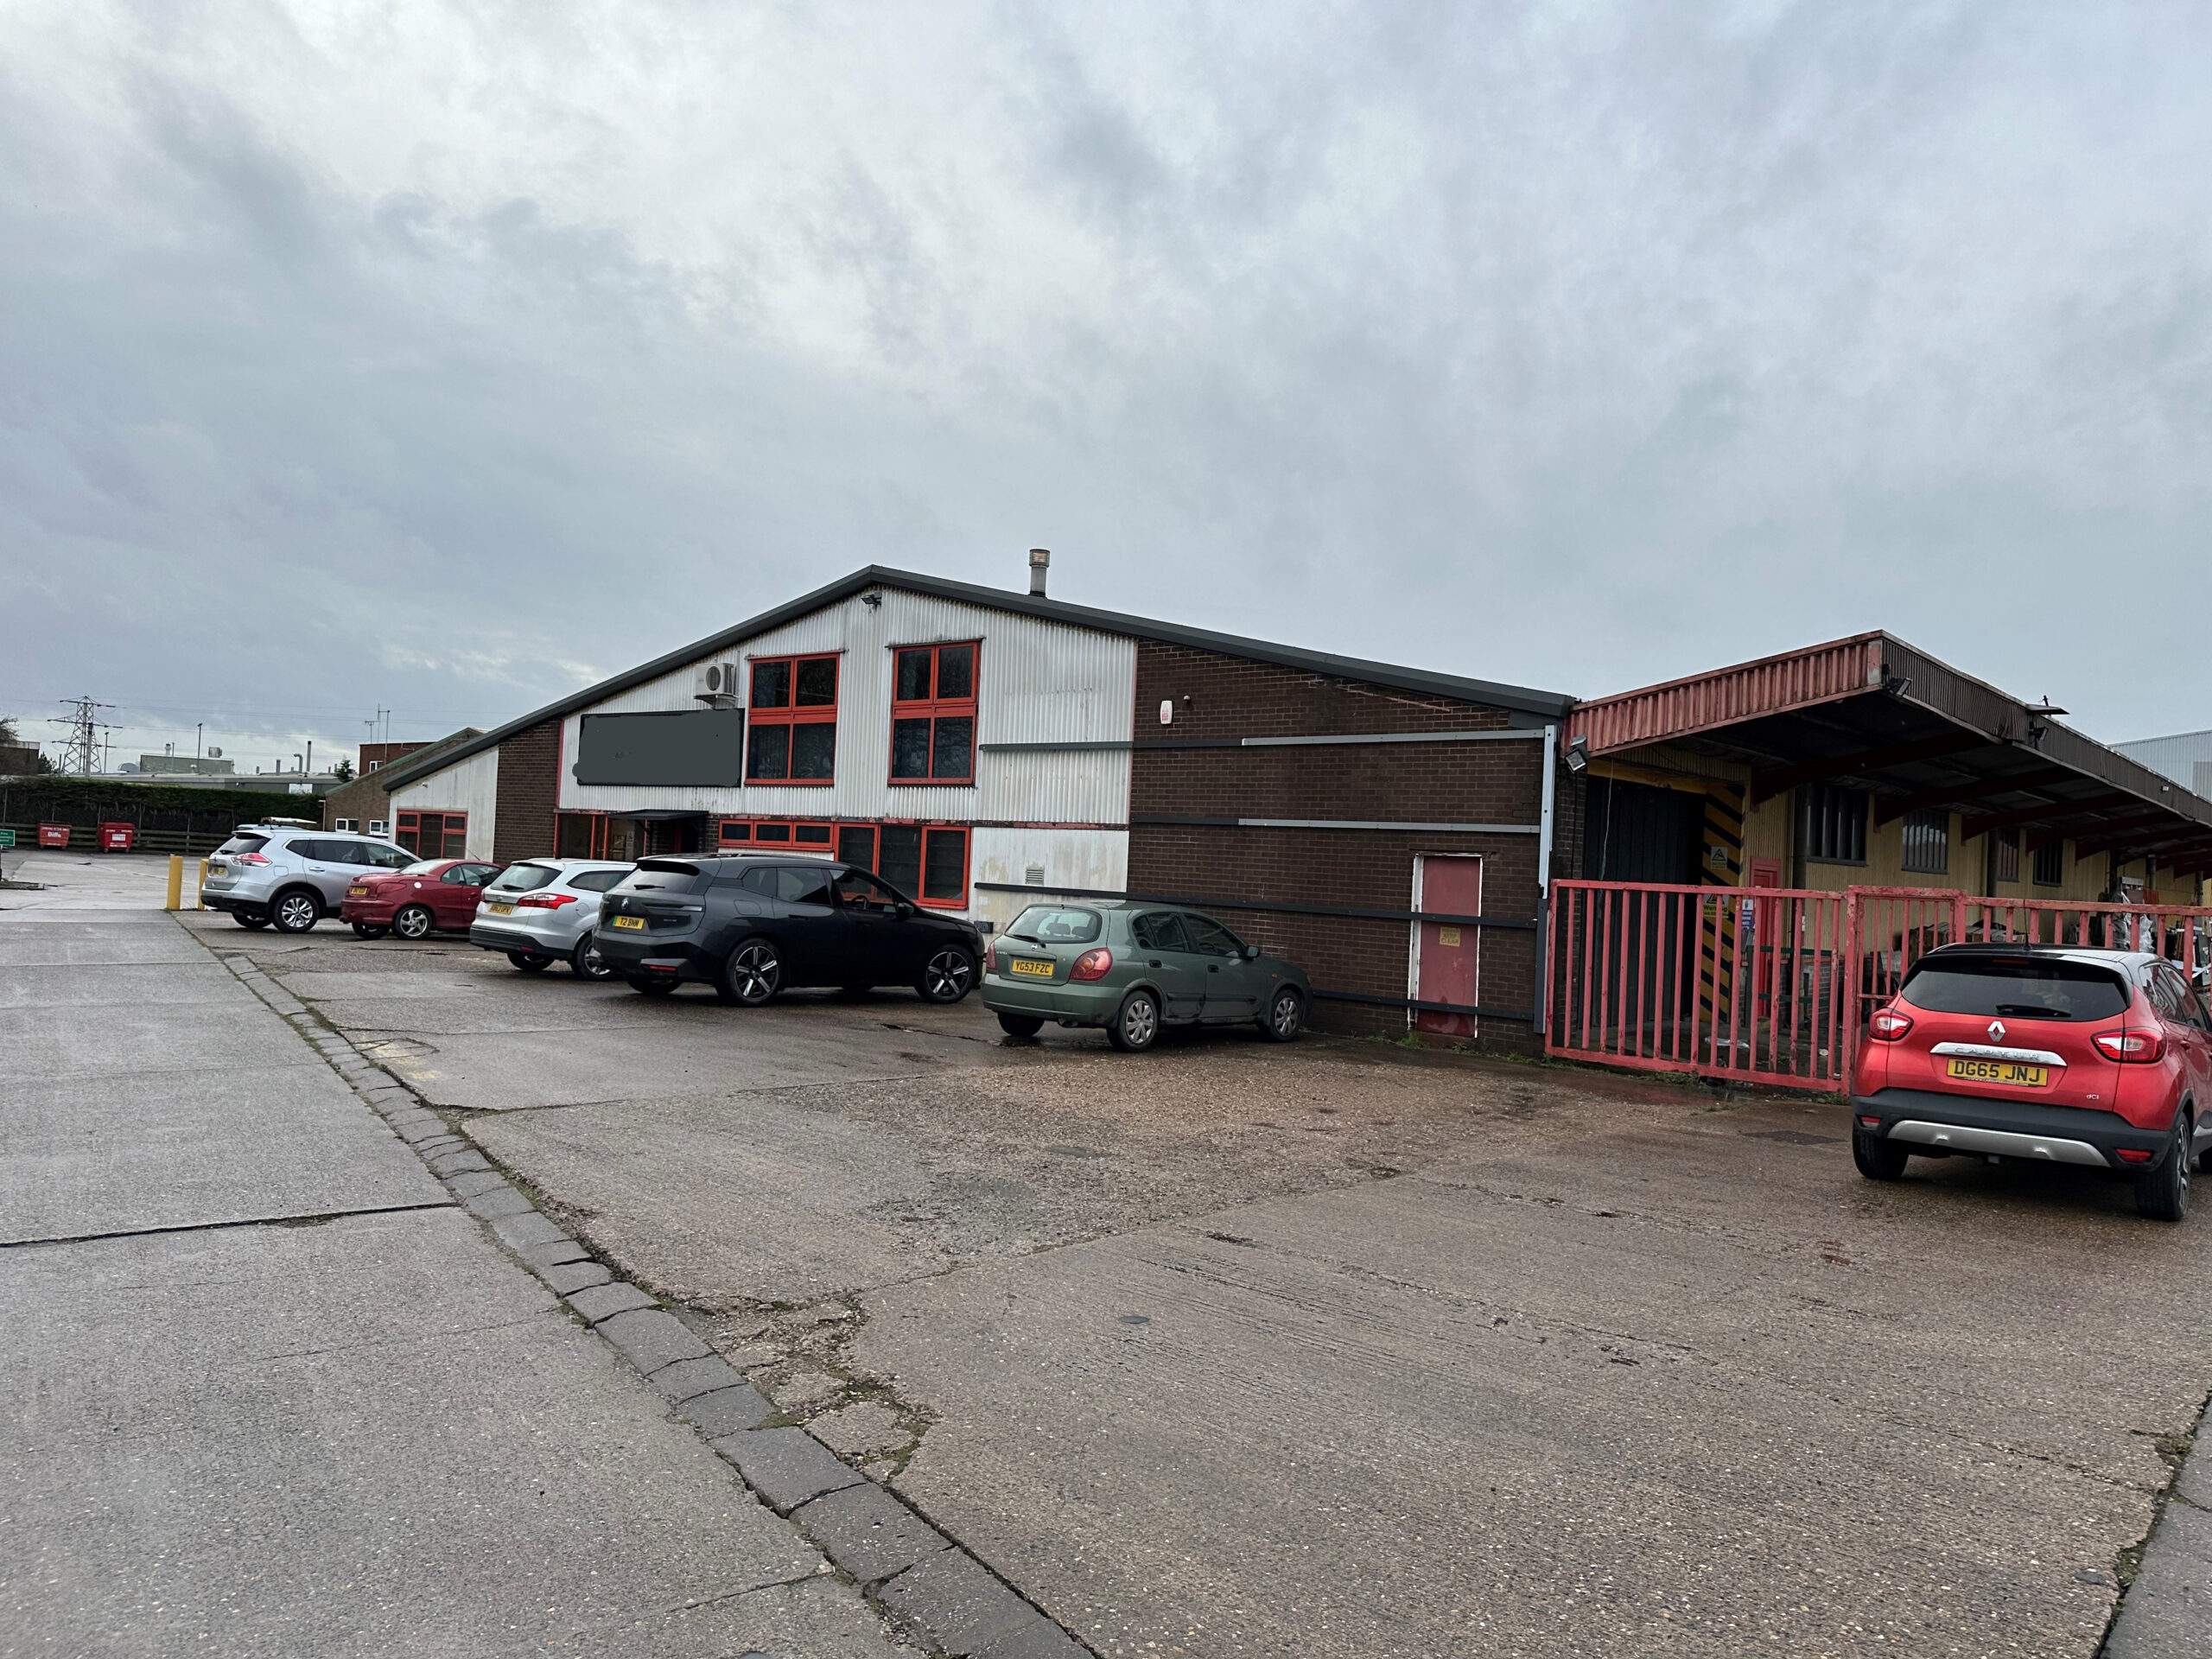 PPH sell 20,000 sq ft industrial unit on Sutton Fields Industrial estate in Hull.